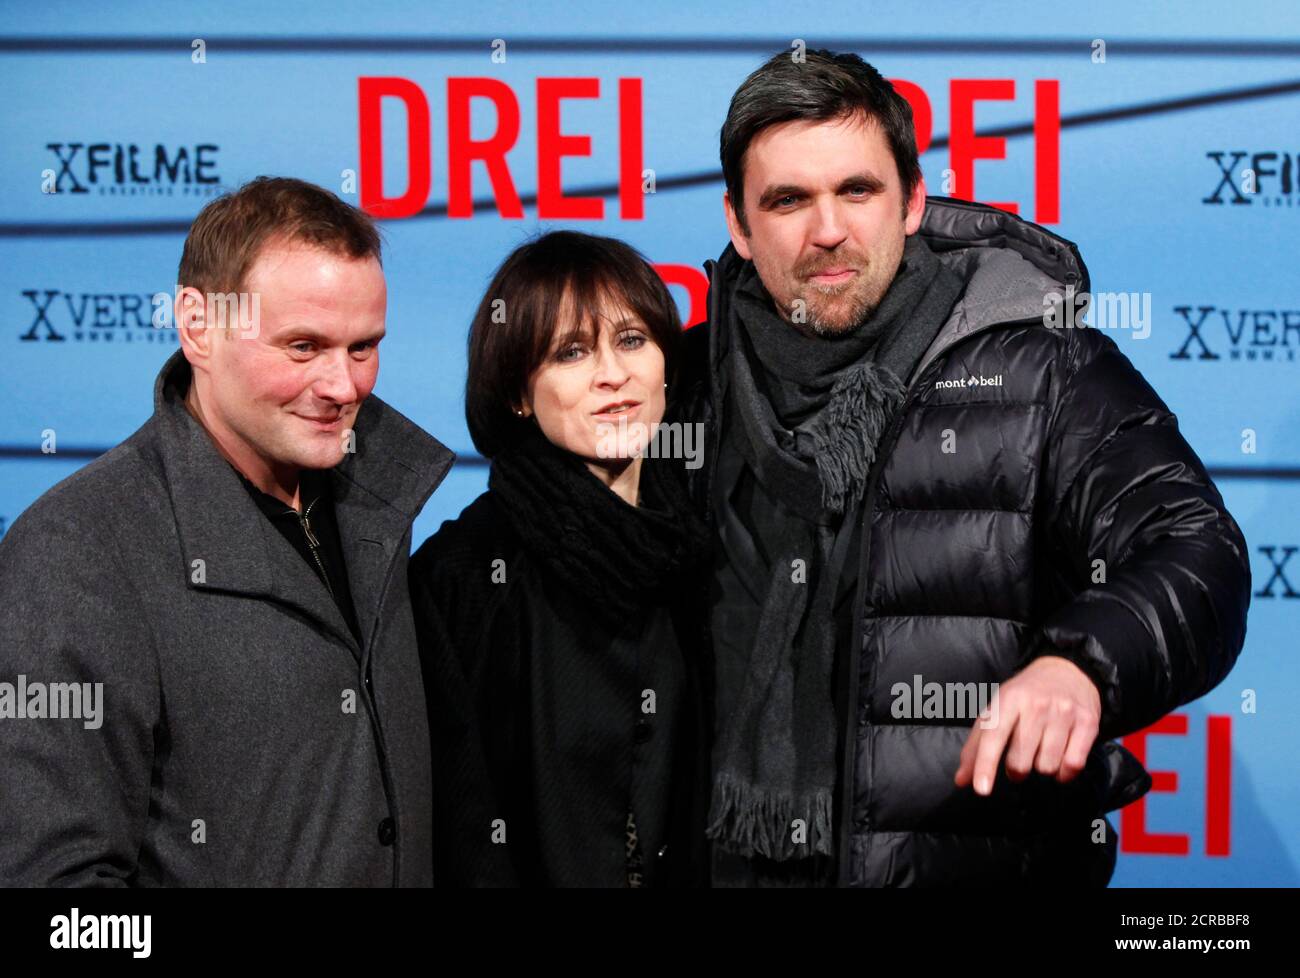 Actors Devid Striesow (L), Sophie Rois and Sebastian Schipper (R) pose for  pictures before the premiere of their movie 'Drei' (Three) in Berlin,  December 13, 2010. REUTERS/Thomas Peter (GERMANY - Tags: ENTERTAINMENT